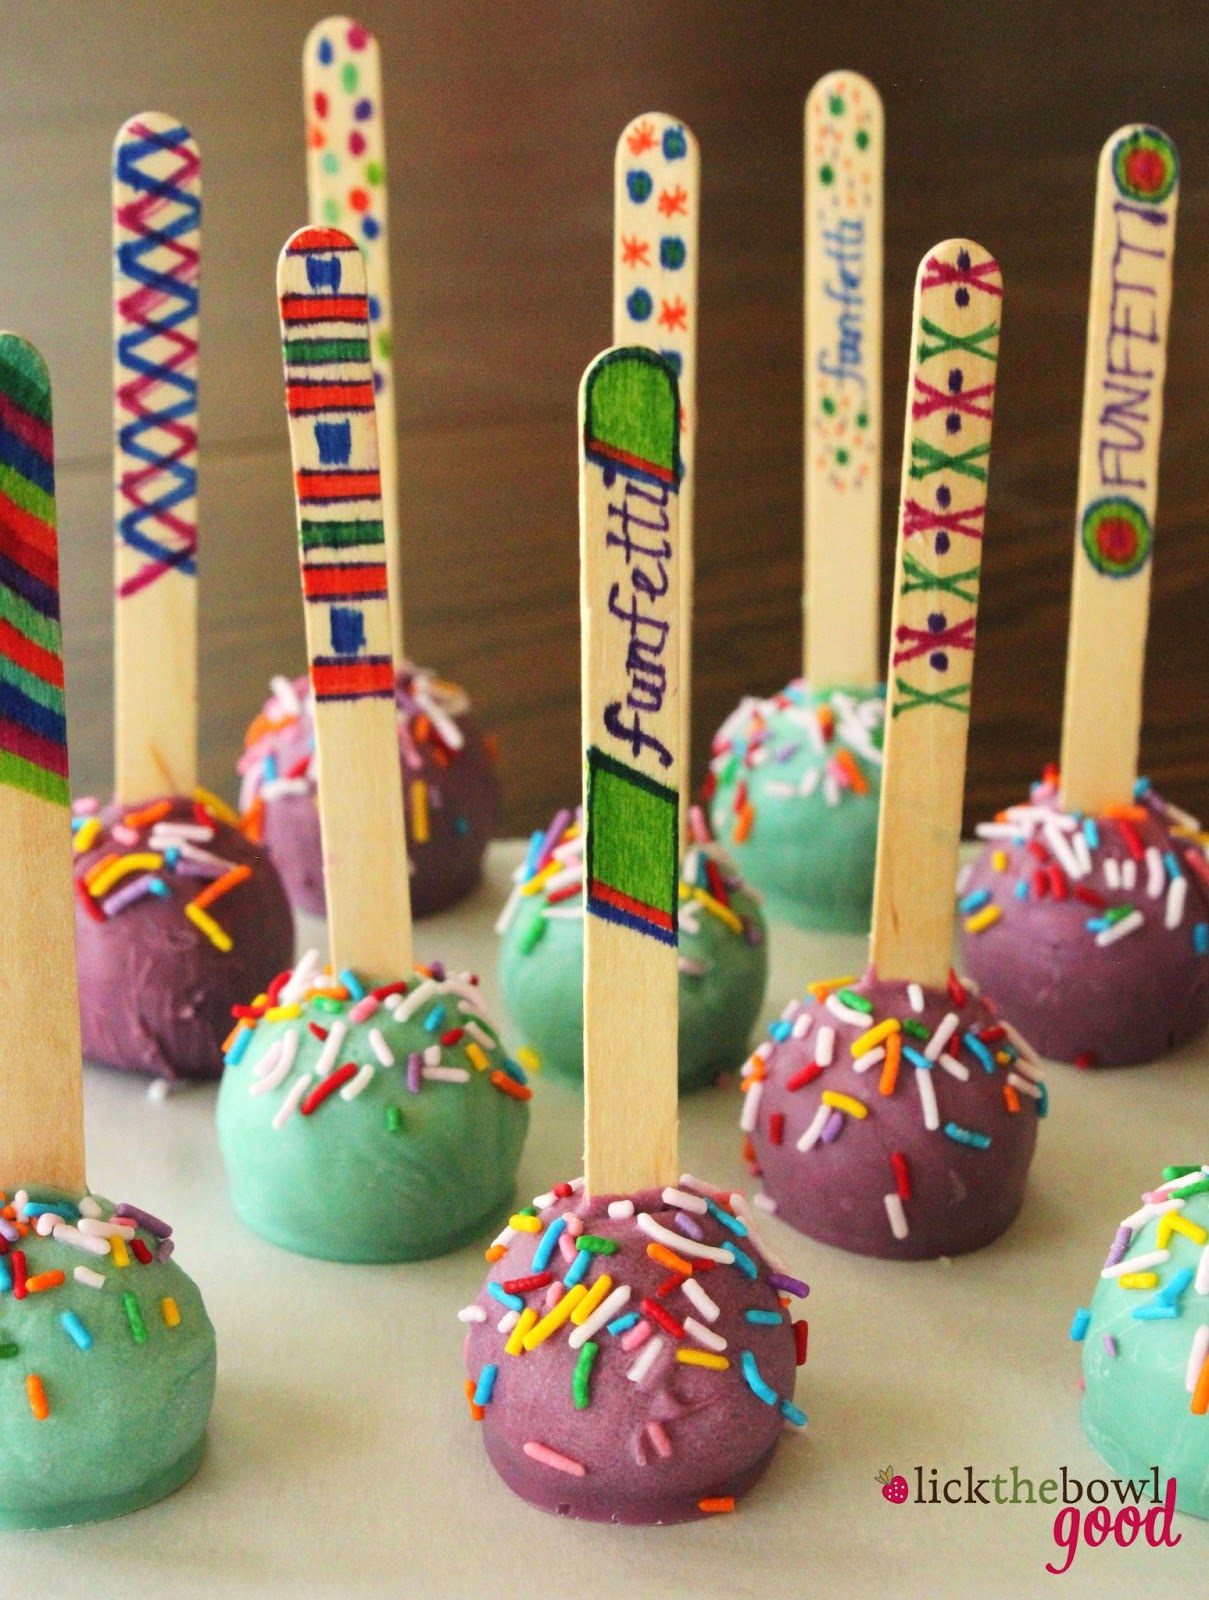 Lick The Bowl Good: My Birthday Cakes and No-Bake Cake Pops